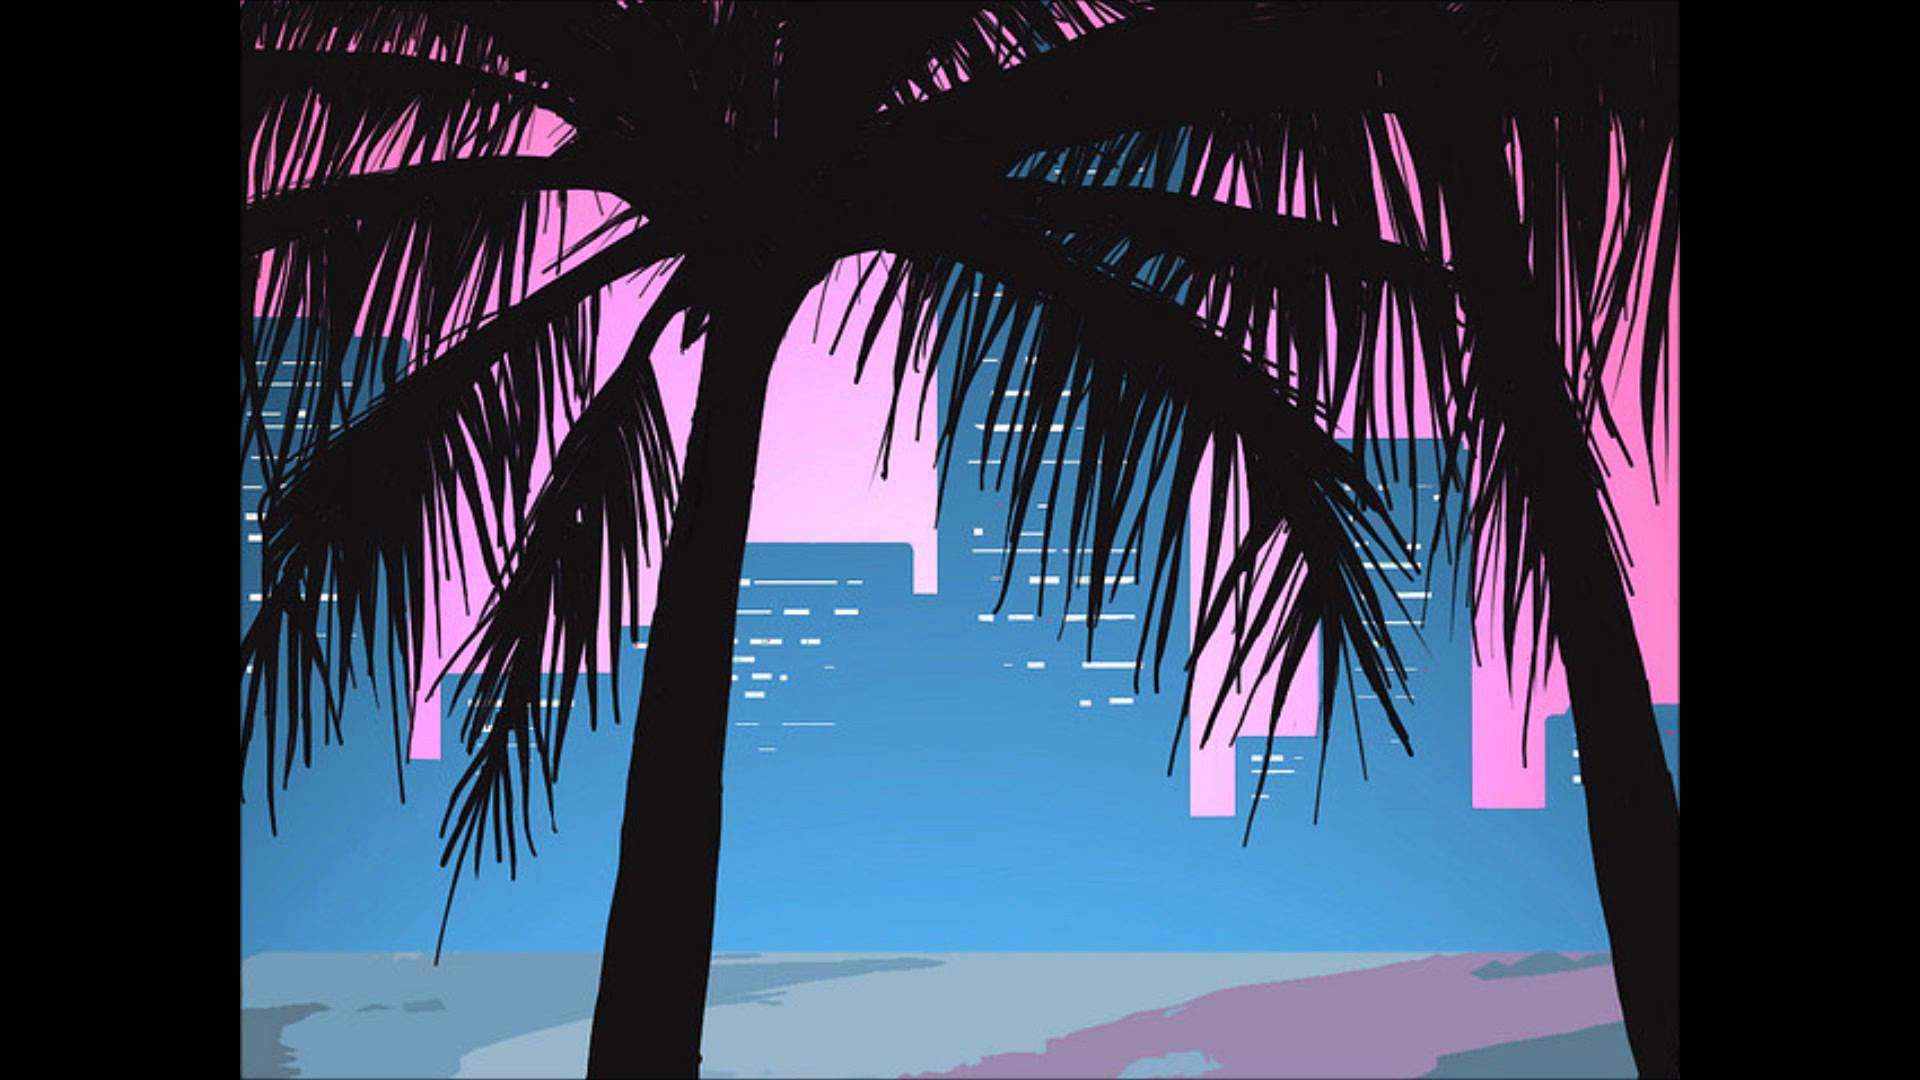 Miami Vice Wallpapers